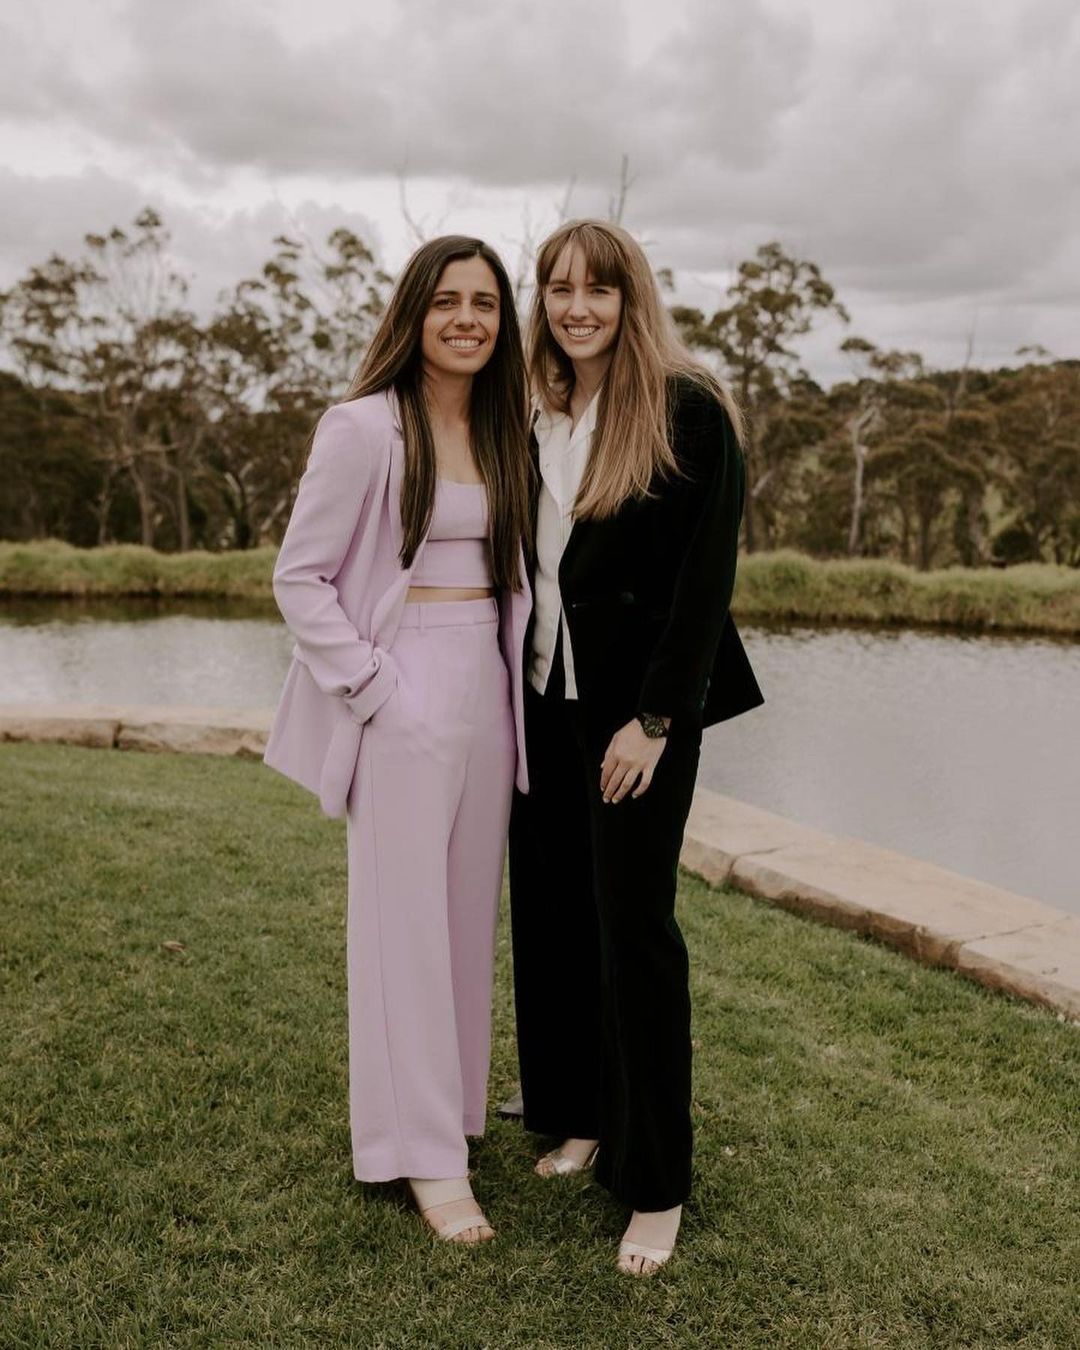 Alex Chidiac Attending A Ceremony With Her Partner Erin Clout